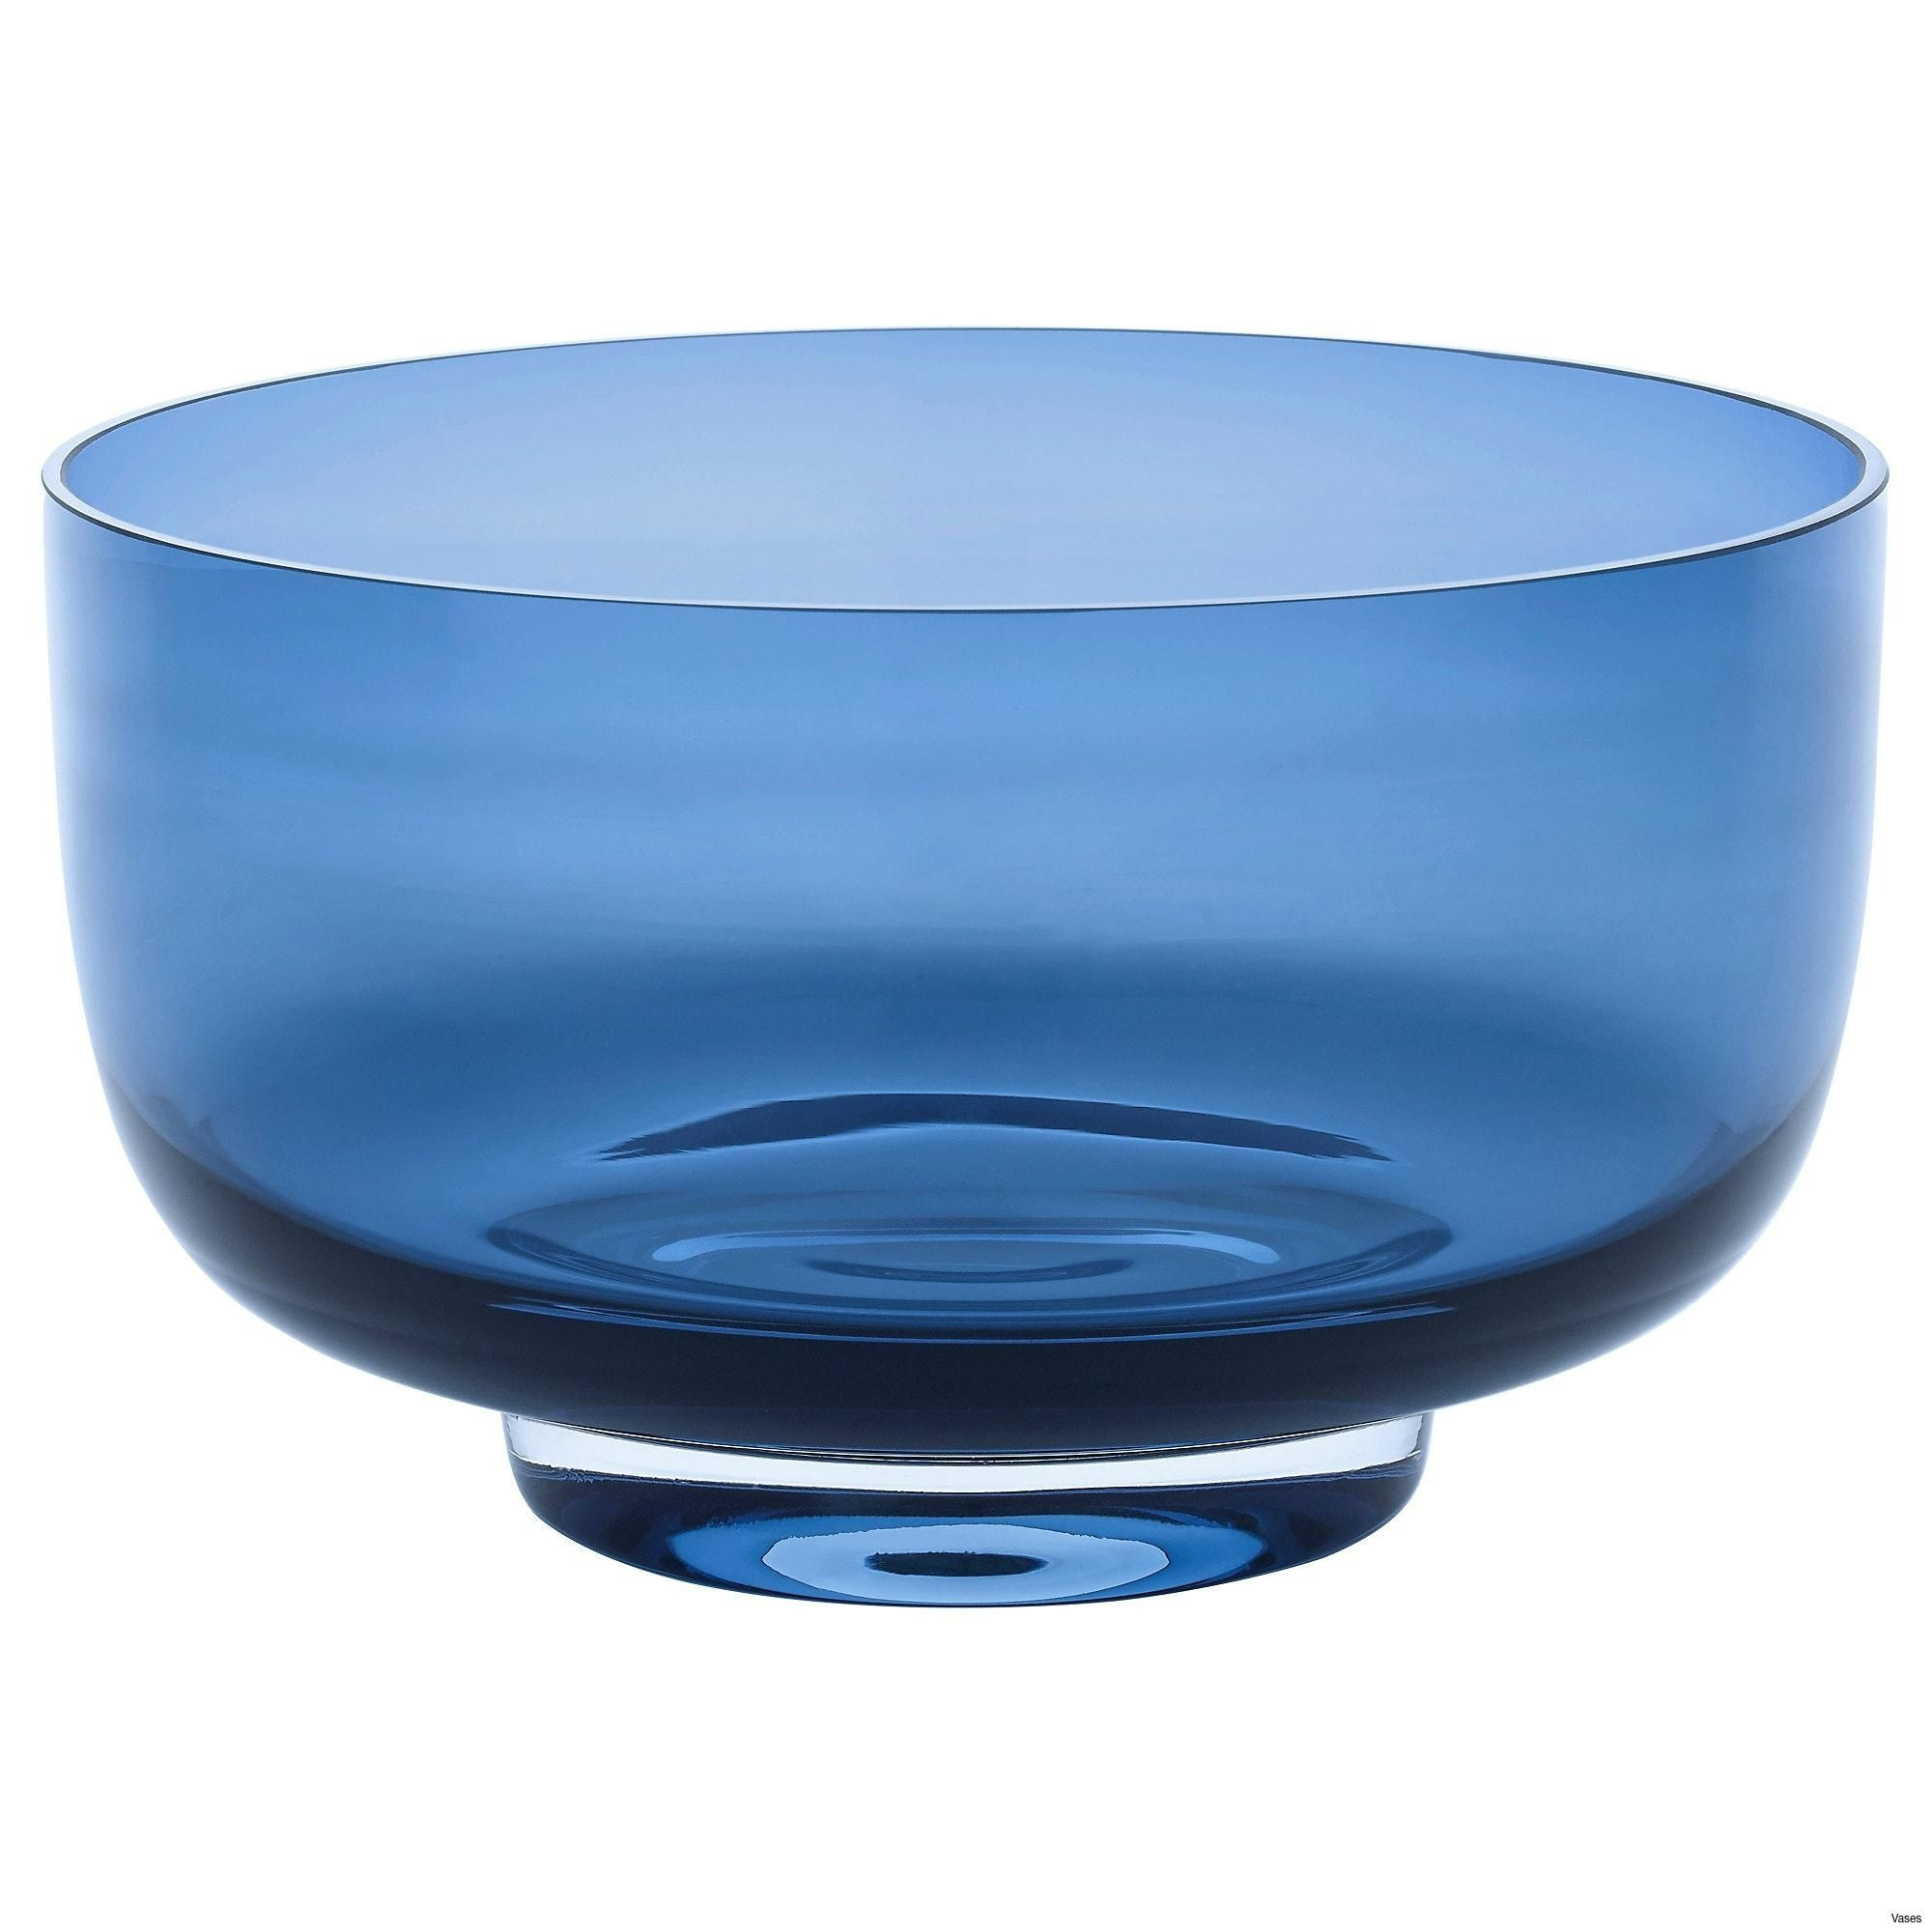 20 attractive Light Blue Glass Vase 2024 free download light blue glass vase of blue crystal vase unique decorative glass bowl new living room ikea with regard to blue crystal vase unique decorative glass bowl new living room ikea vases awesome 